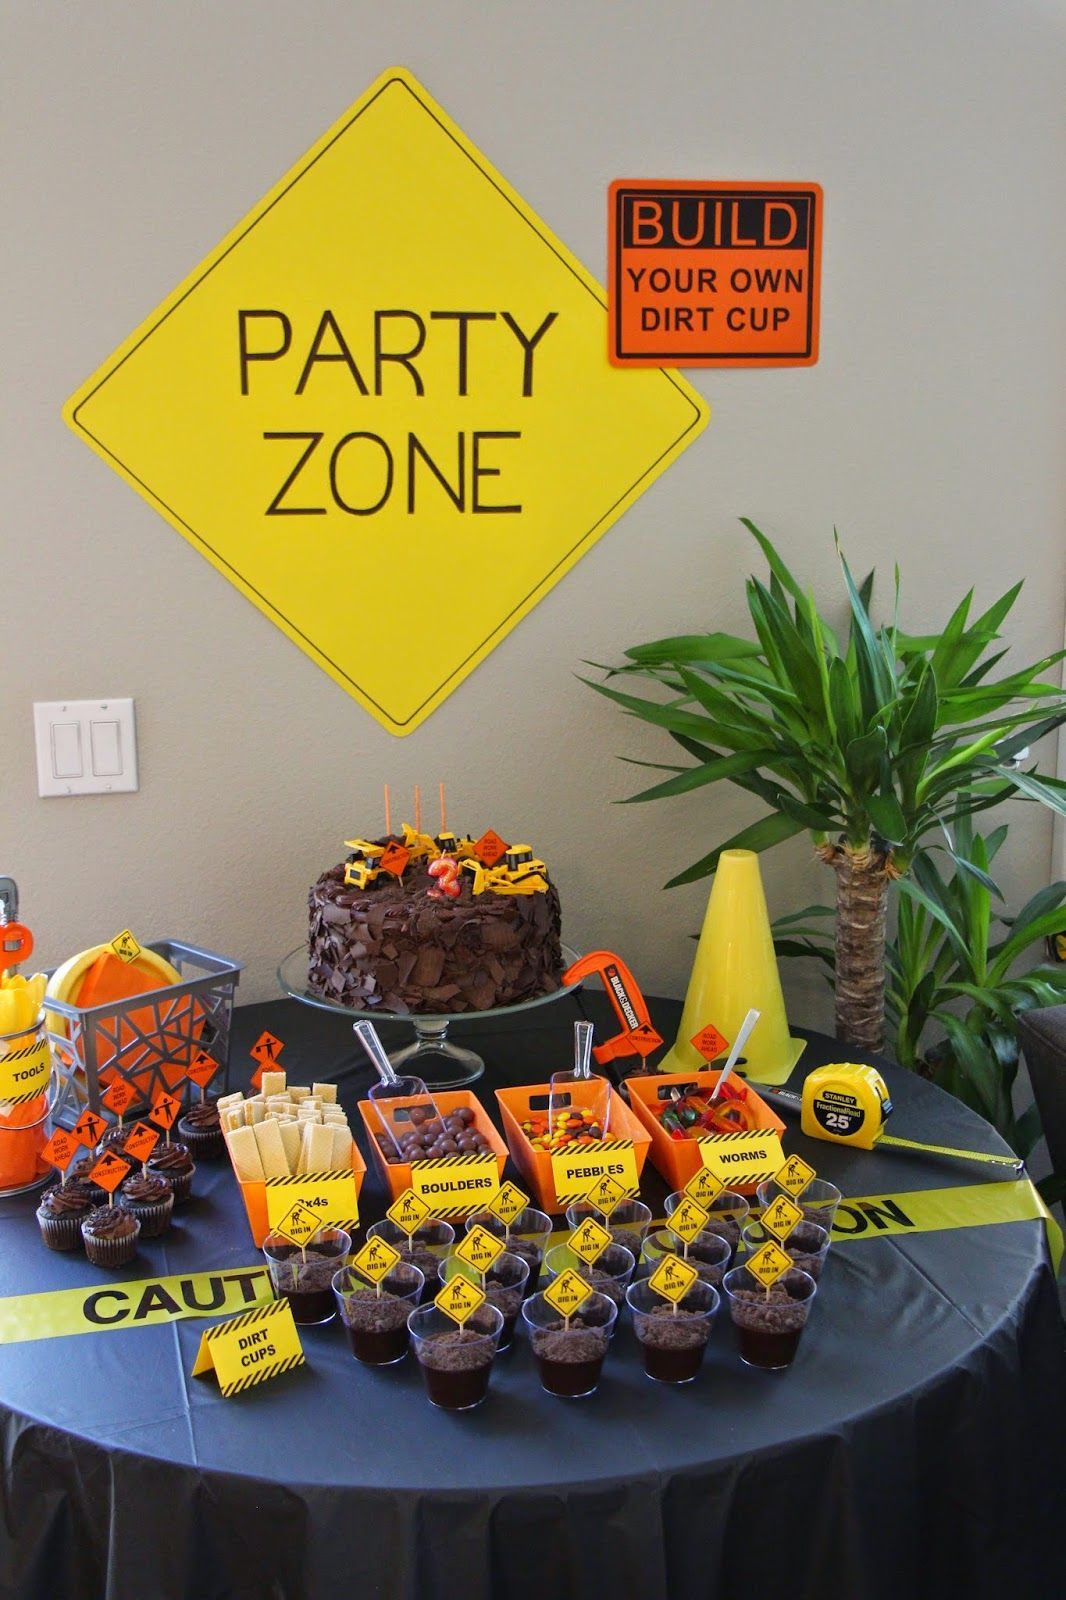 Construction Birthday Party Dessert Table, Build Your Own Dirt Cup, Cupcakes, Costco Cake, Party Zone Sign